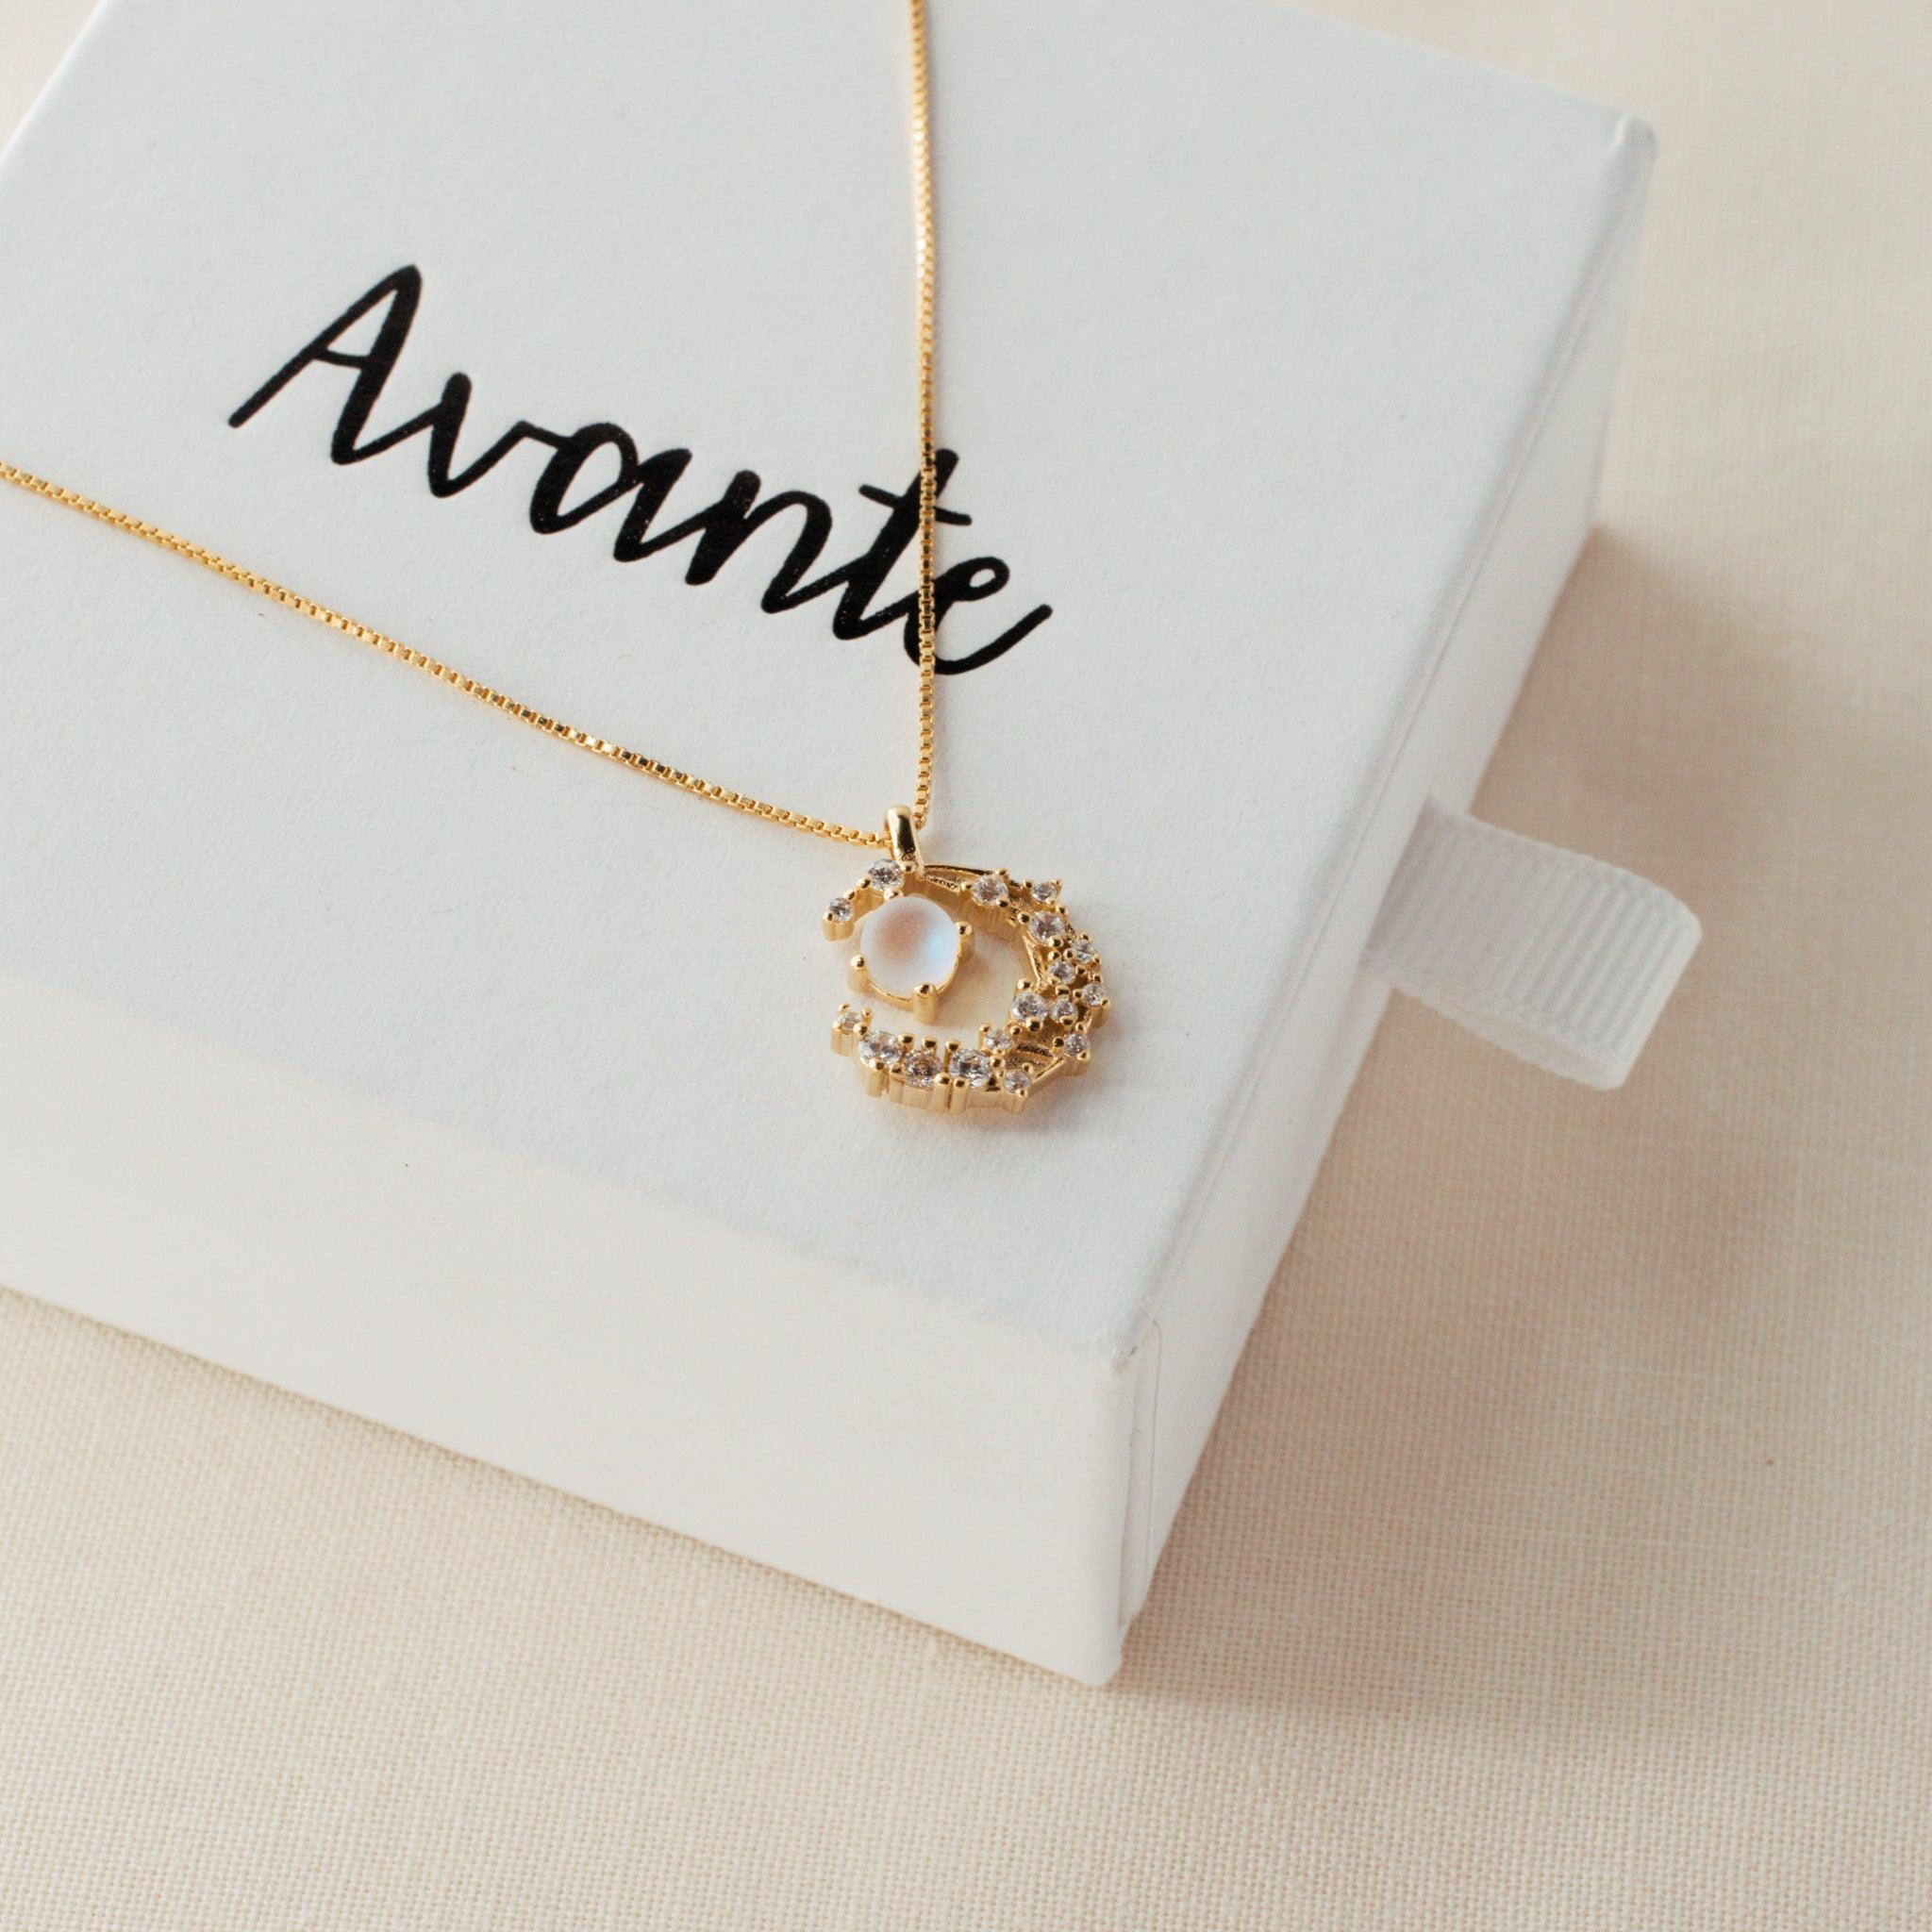 Sparkling Moon Necklace on a jewelry gift box | Avante Jewel